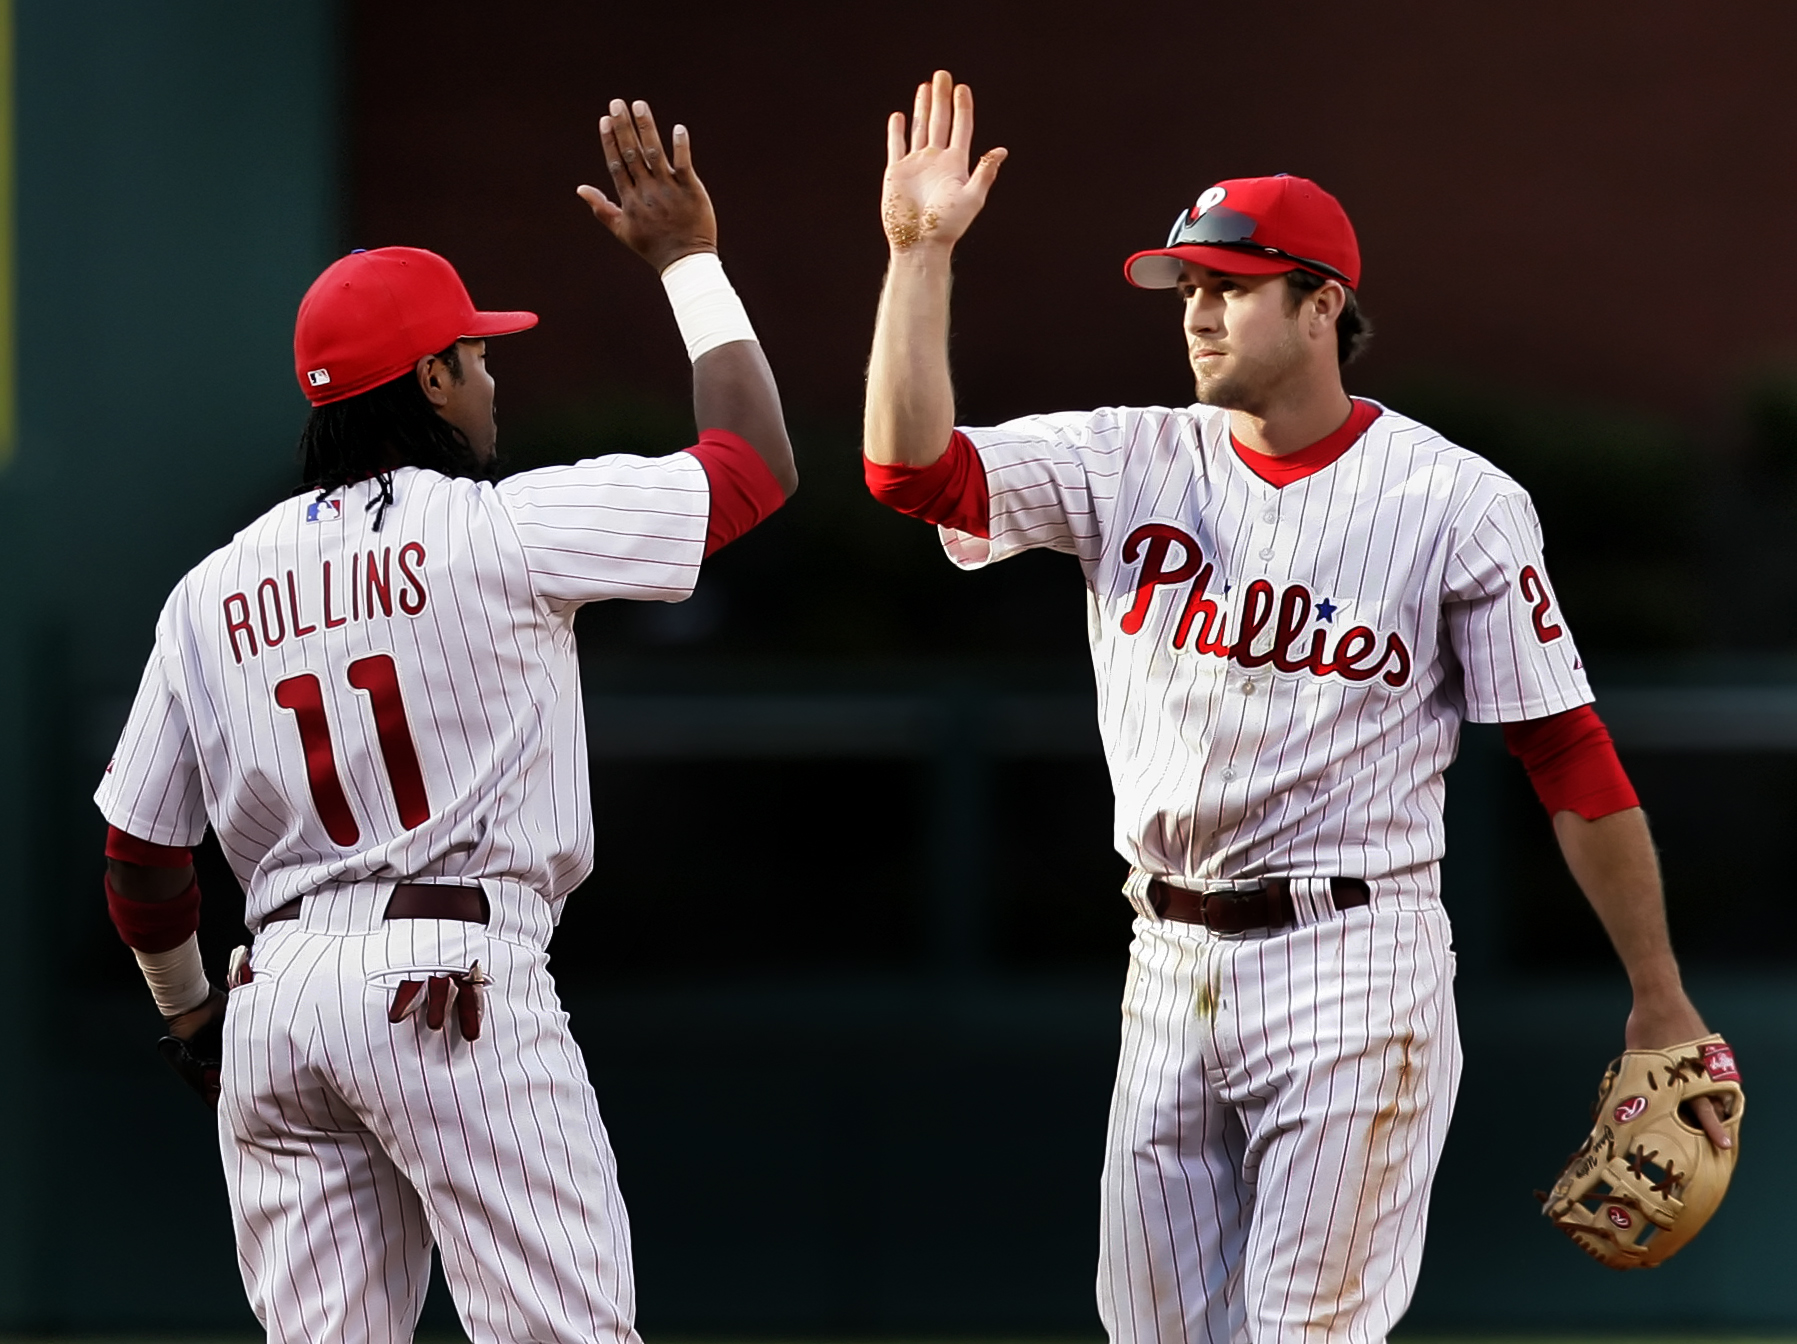 Philadelphia Phillies: Jimmy Rollins' 2,000 Hits Part of His